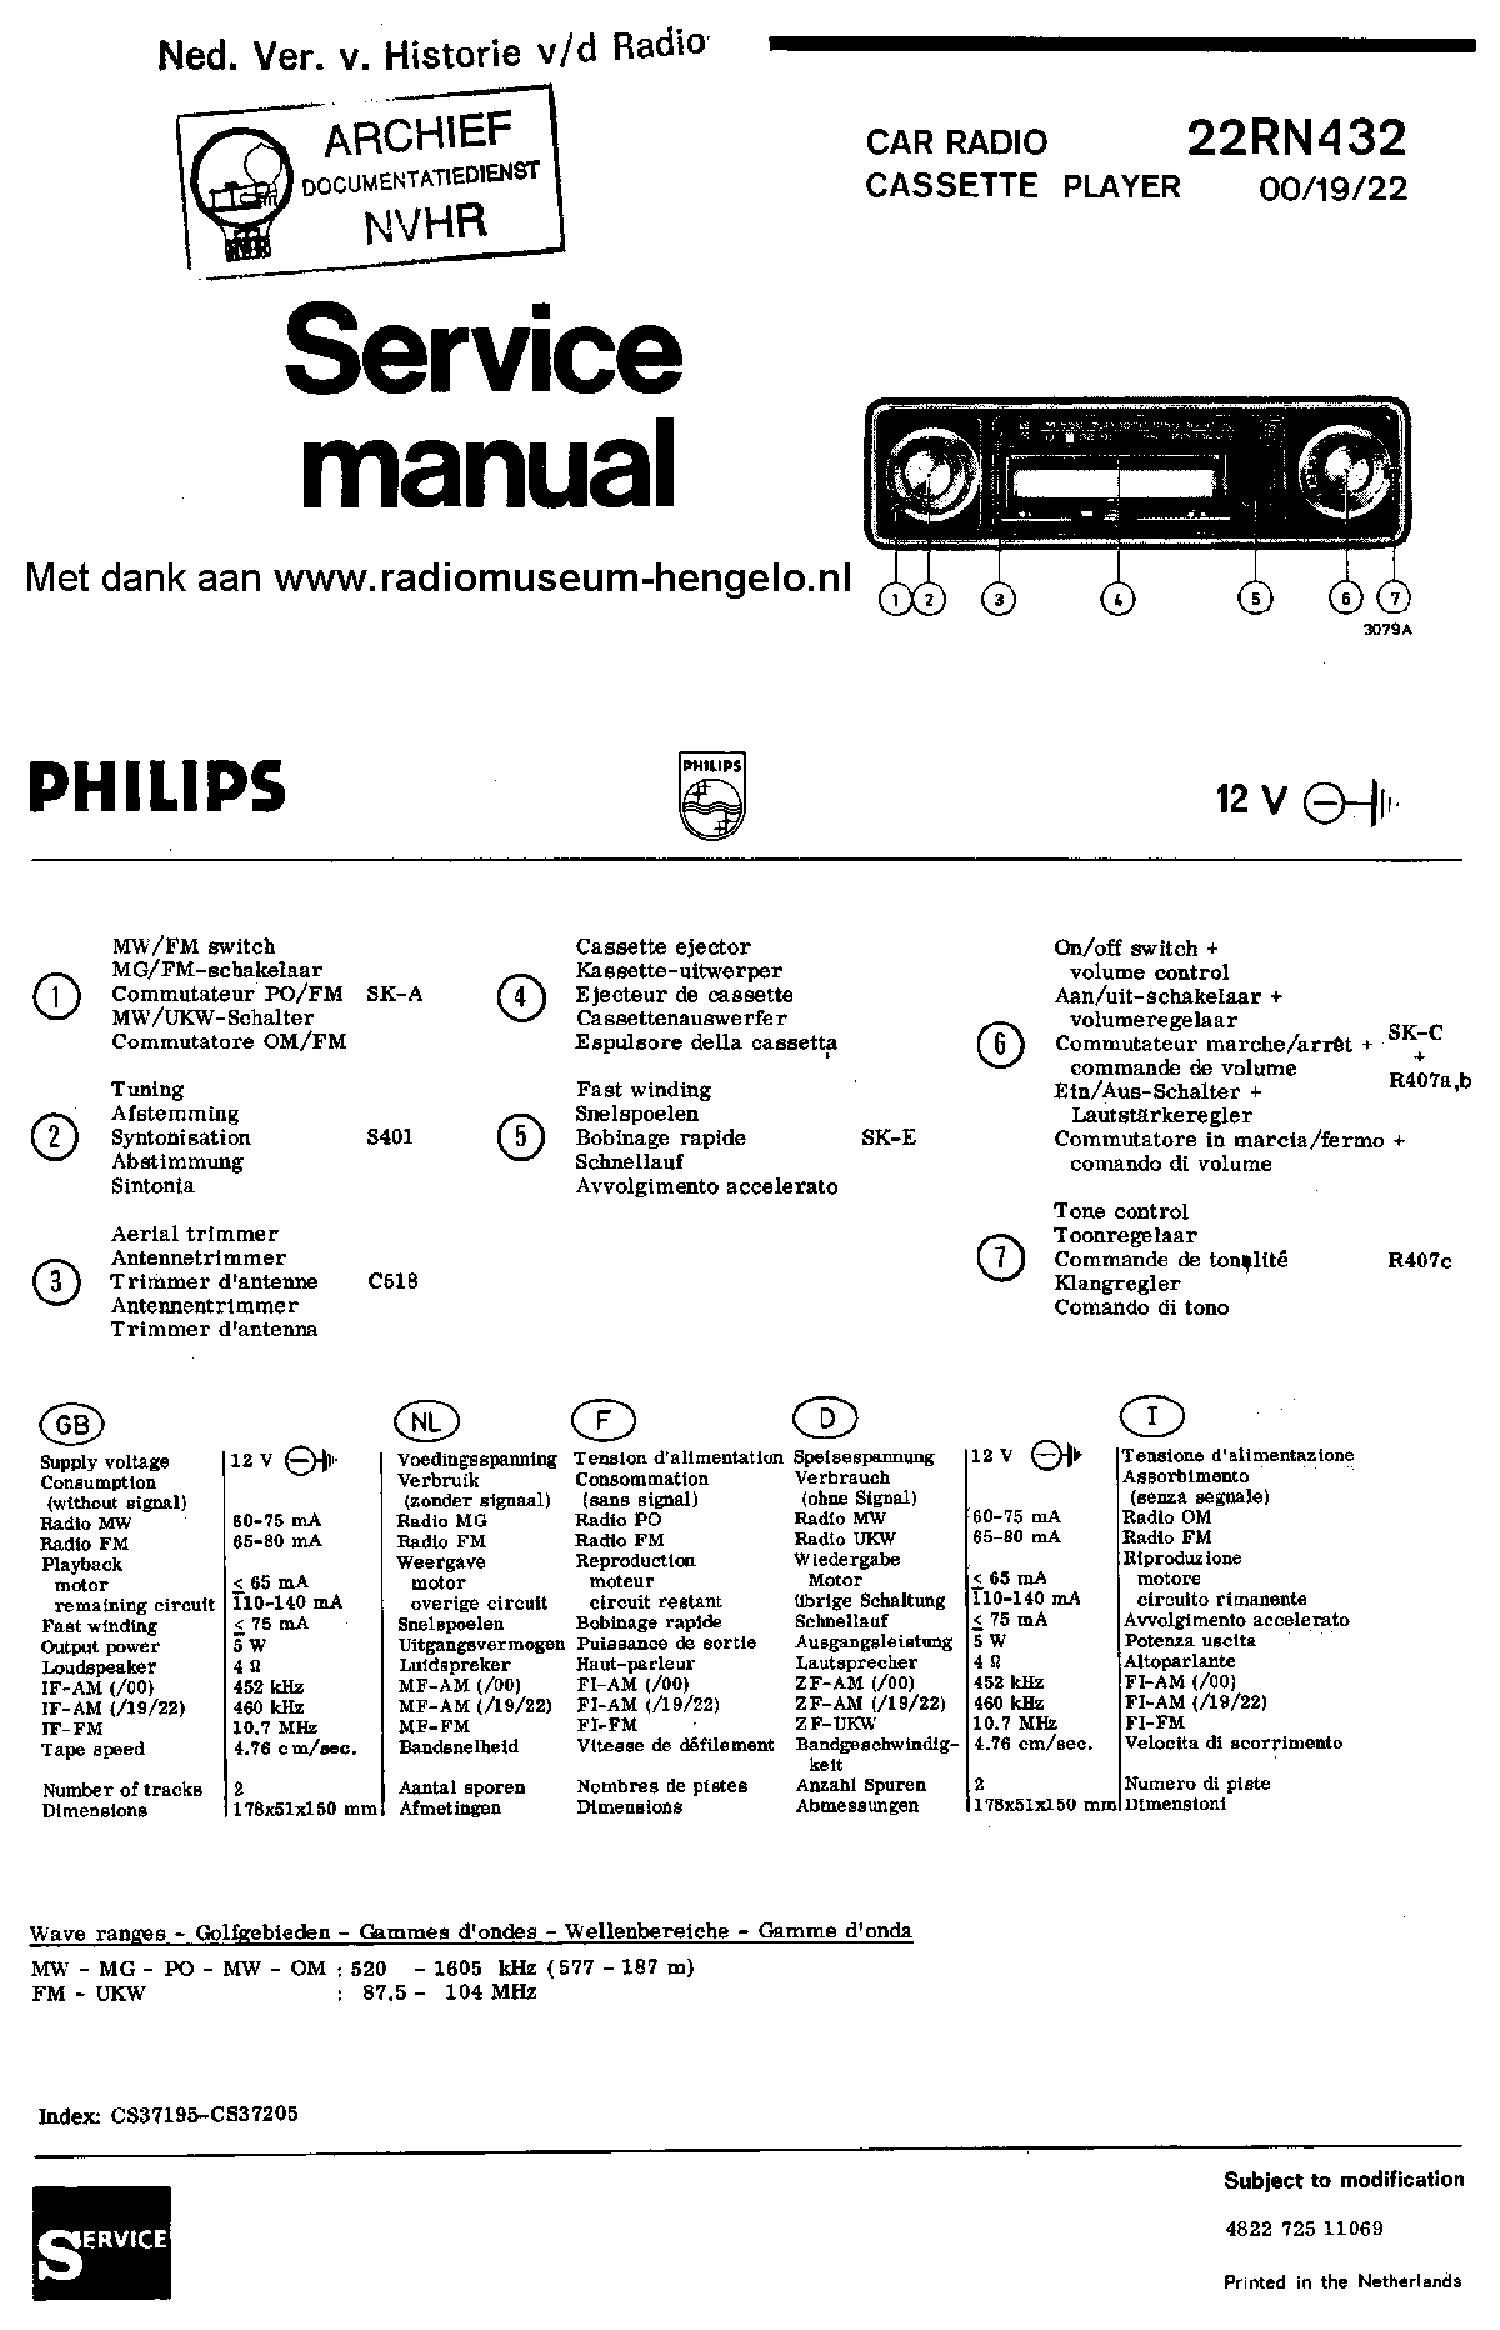 PHILIPS 22RN432-00-19-22 CAR RADIO CASSETTE PLAYER SM service manual (1st page)